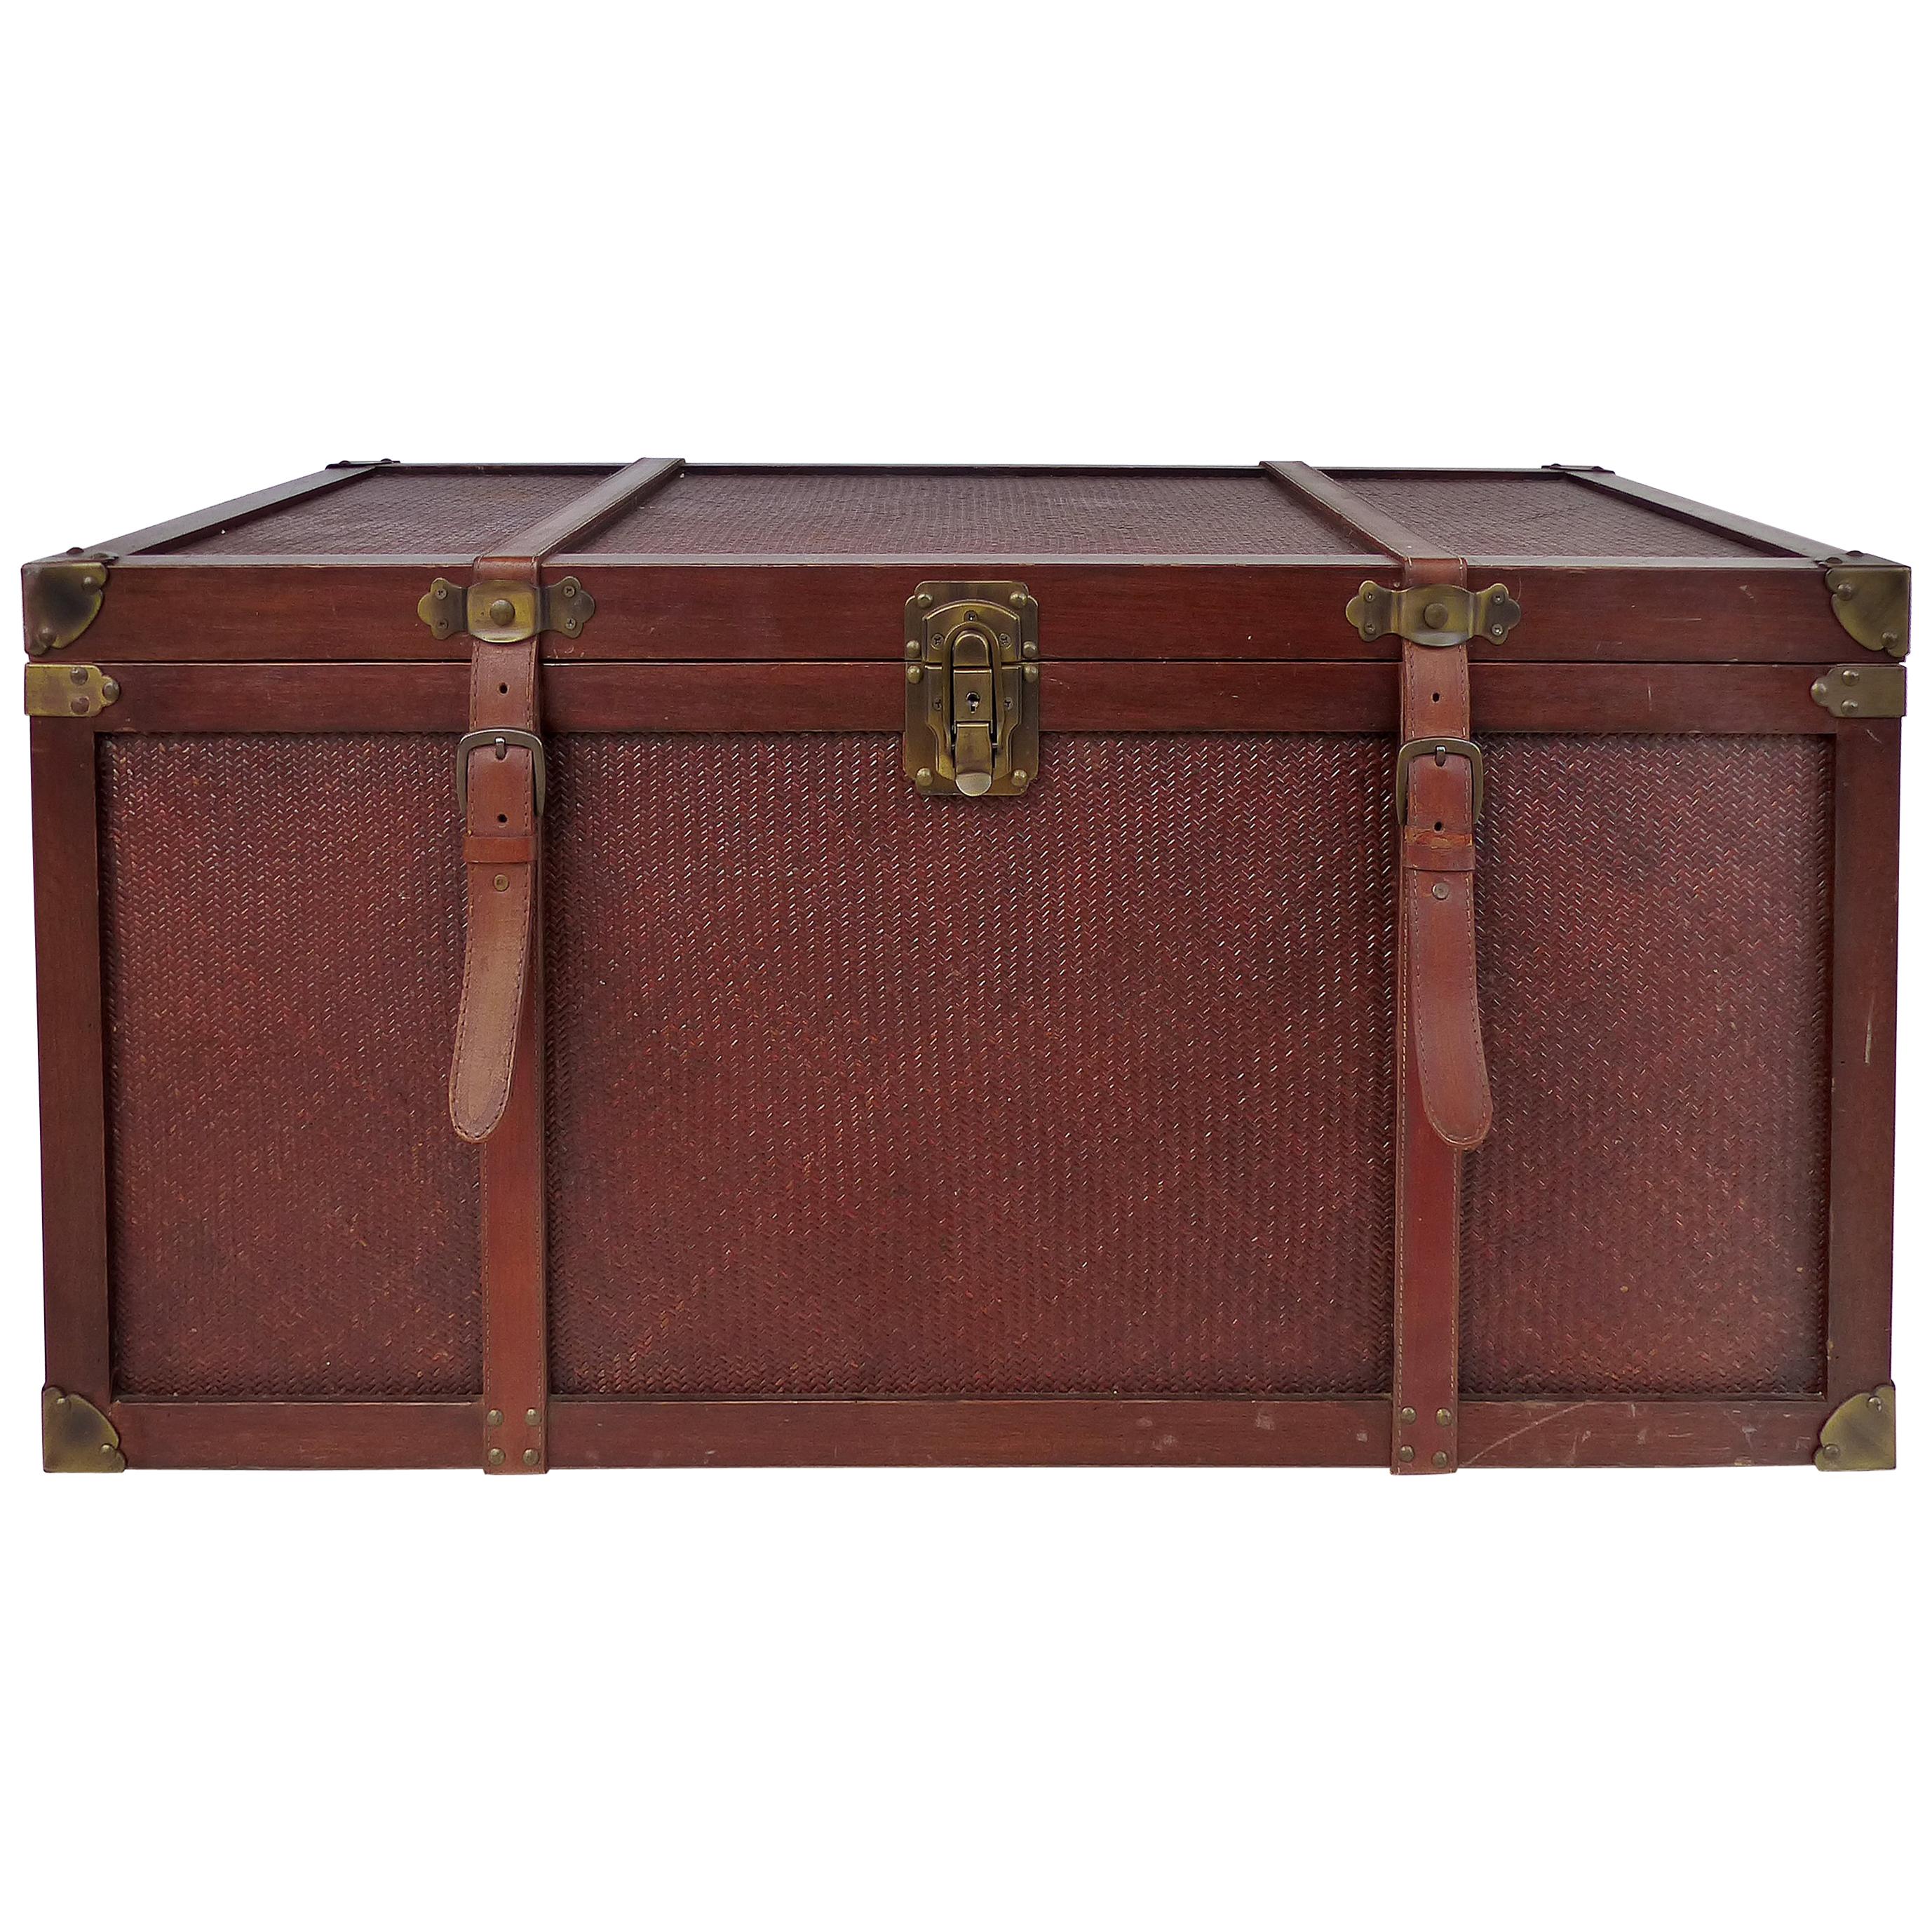 Wood and Woven Reed Blanket Chest with Brass Hardware and Leather Handles